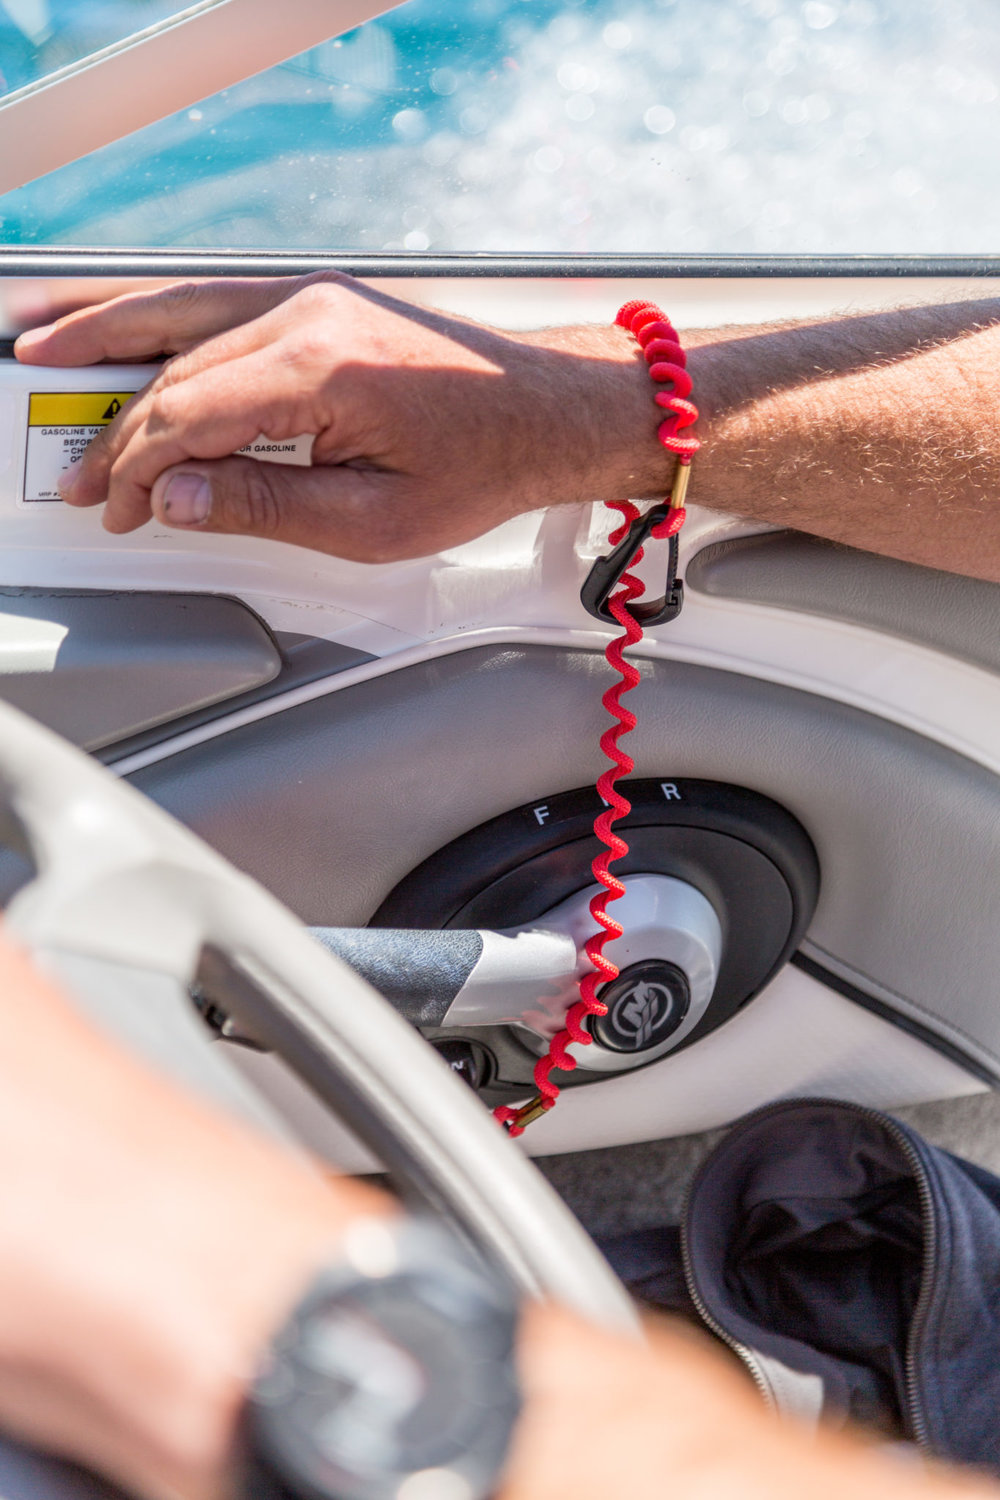 A newly implemented law this year is the need for all boaters to have an engine cut-off device, which is intended to stop the engine if the captain goes overboard.